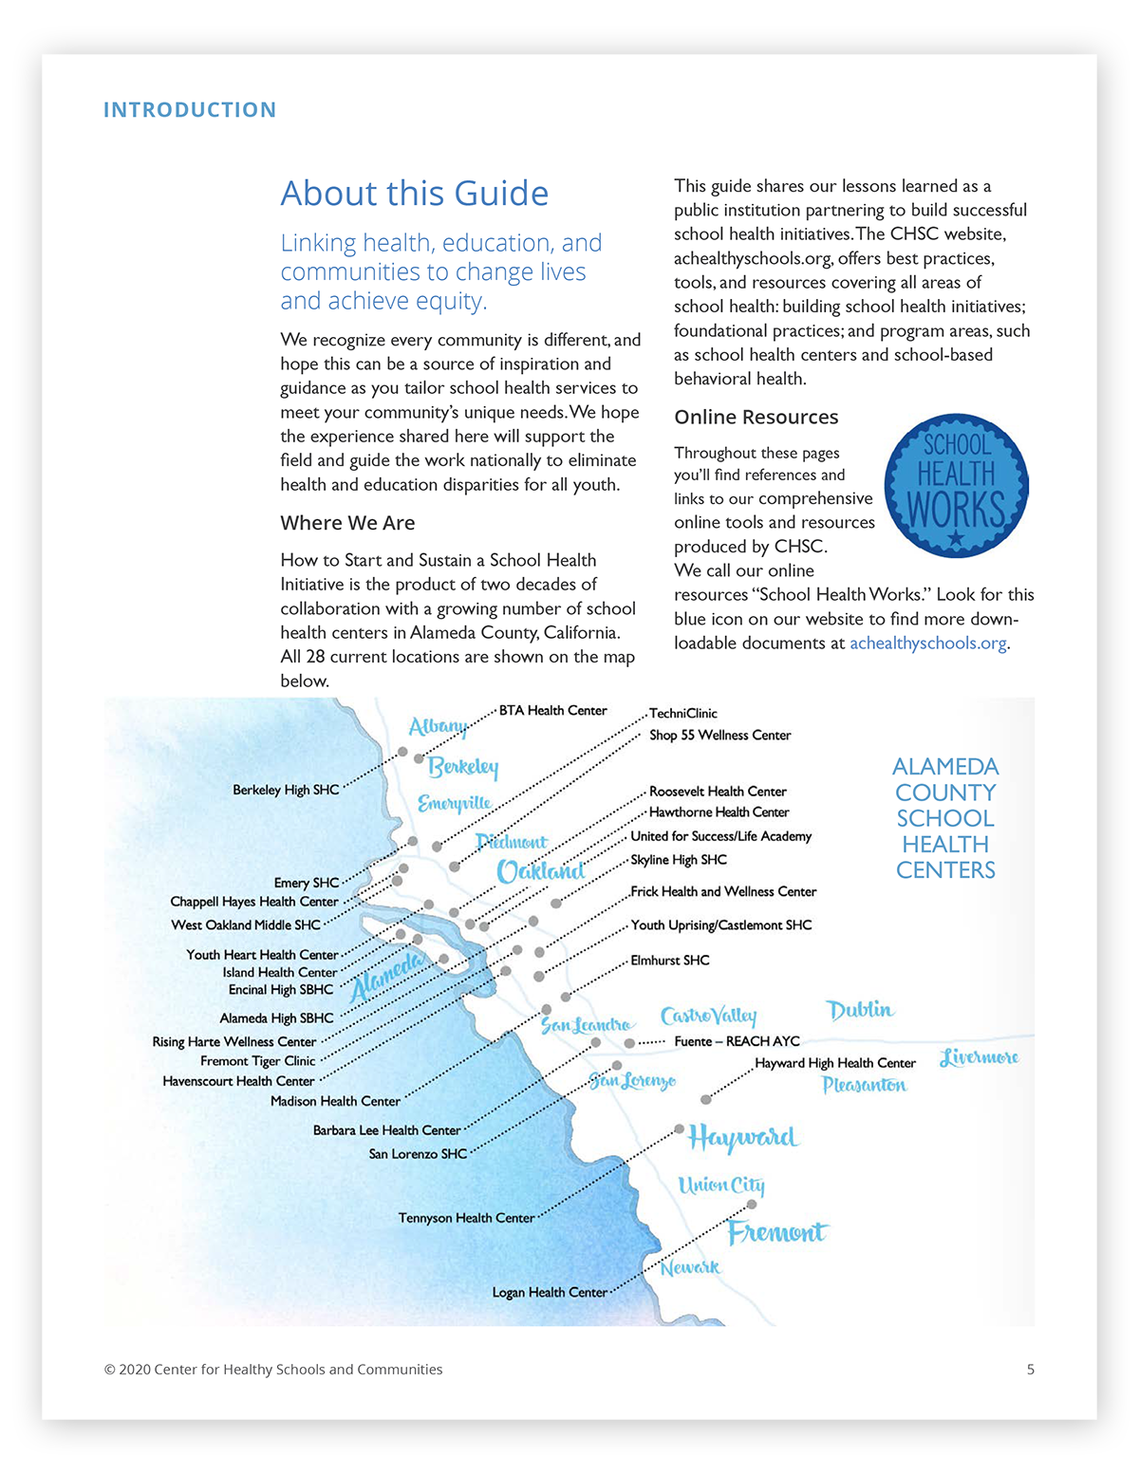 School Health Works document page featuring a map of Alameda County California.